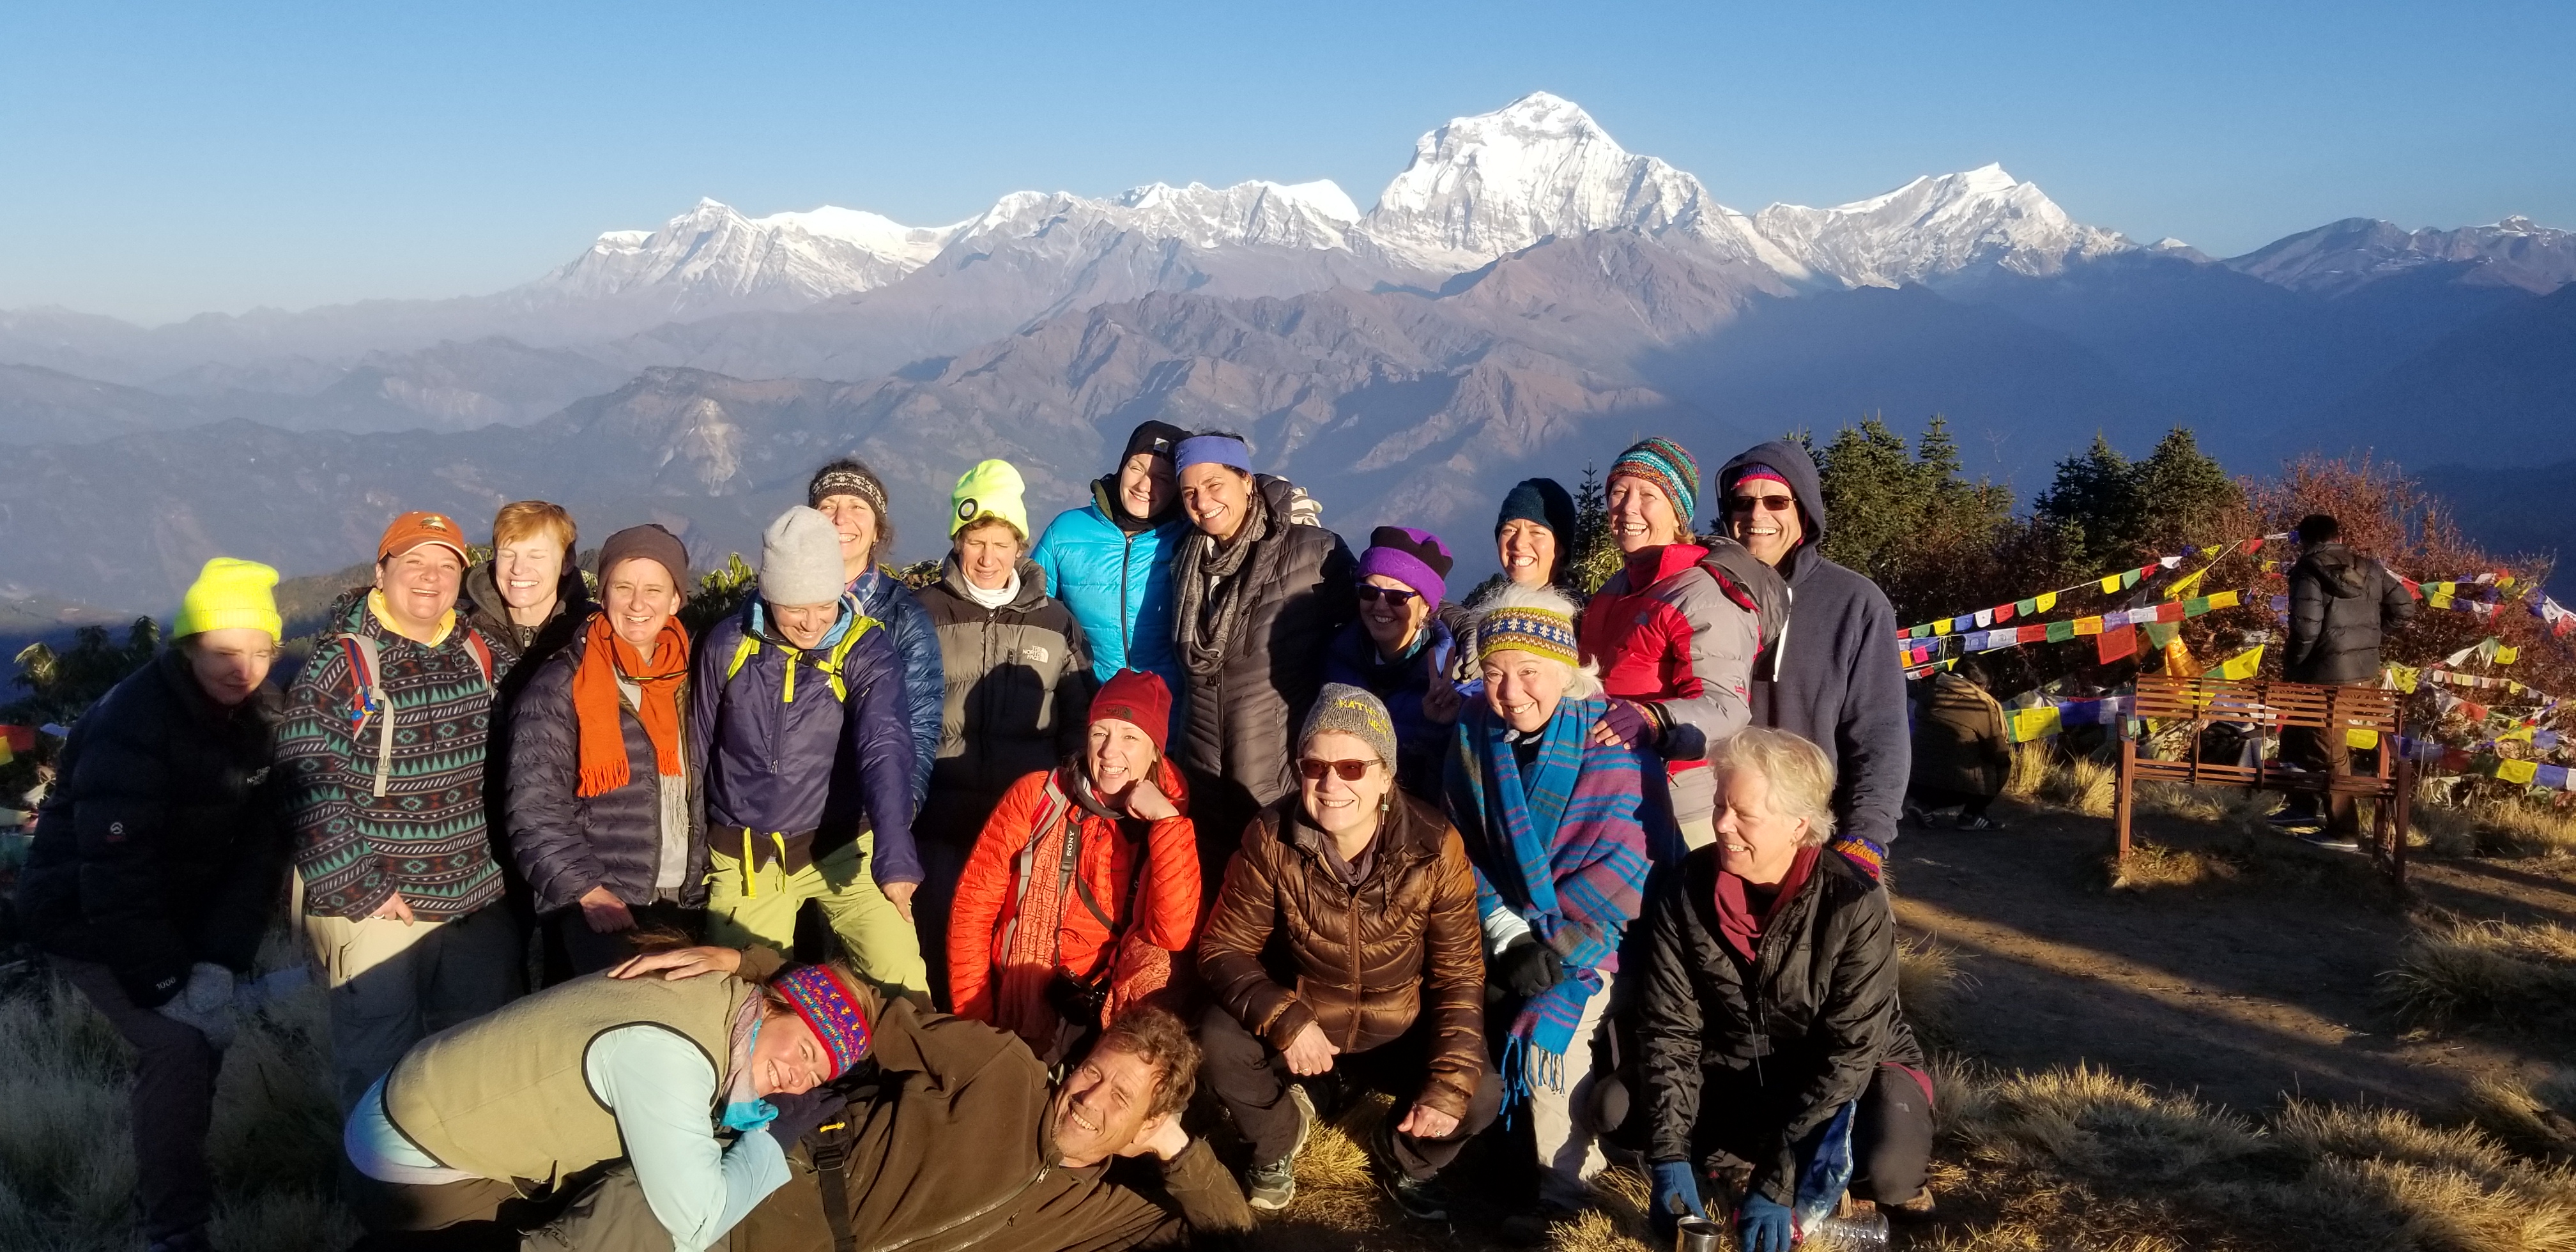 tour group posing before the snow capped himalayas